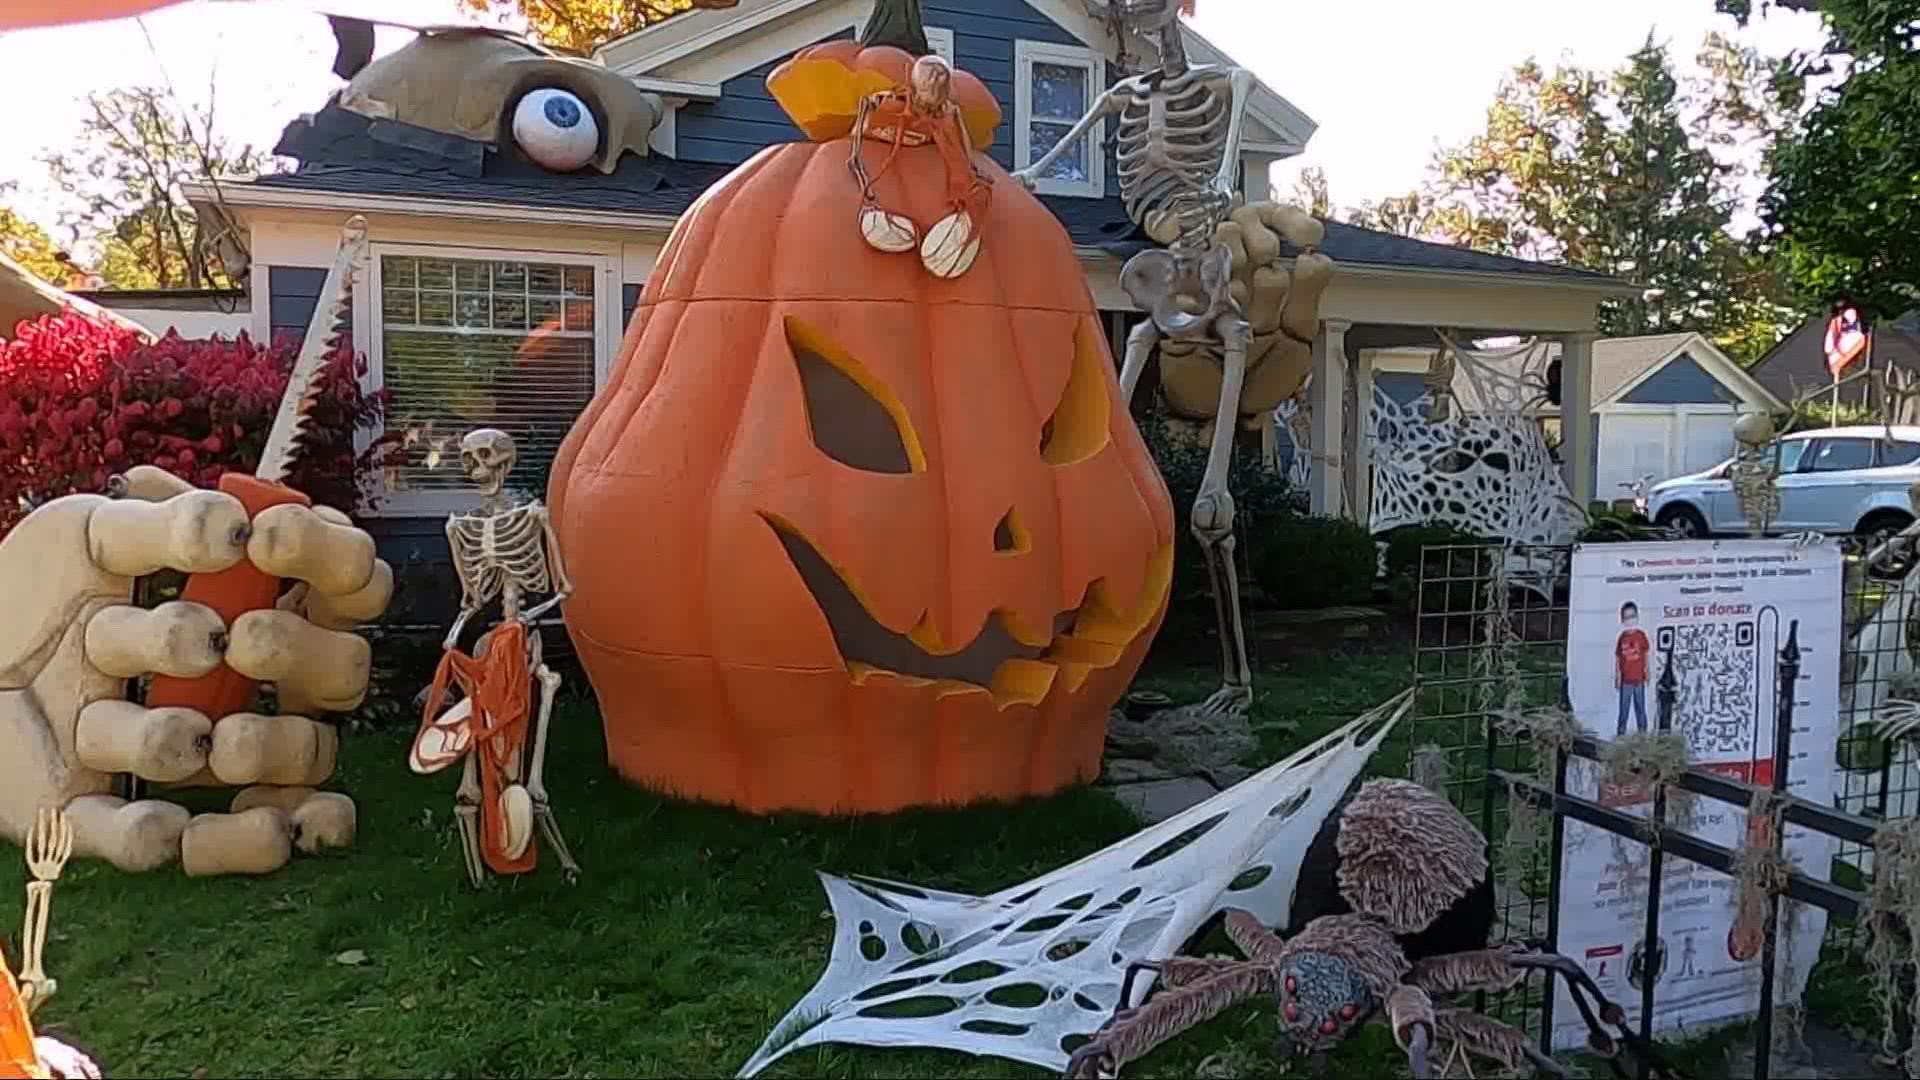 His epic Halloween display in Olmsted Falls is even bigger this year as he created a massive pumpkin to go with his giant skeleton.